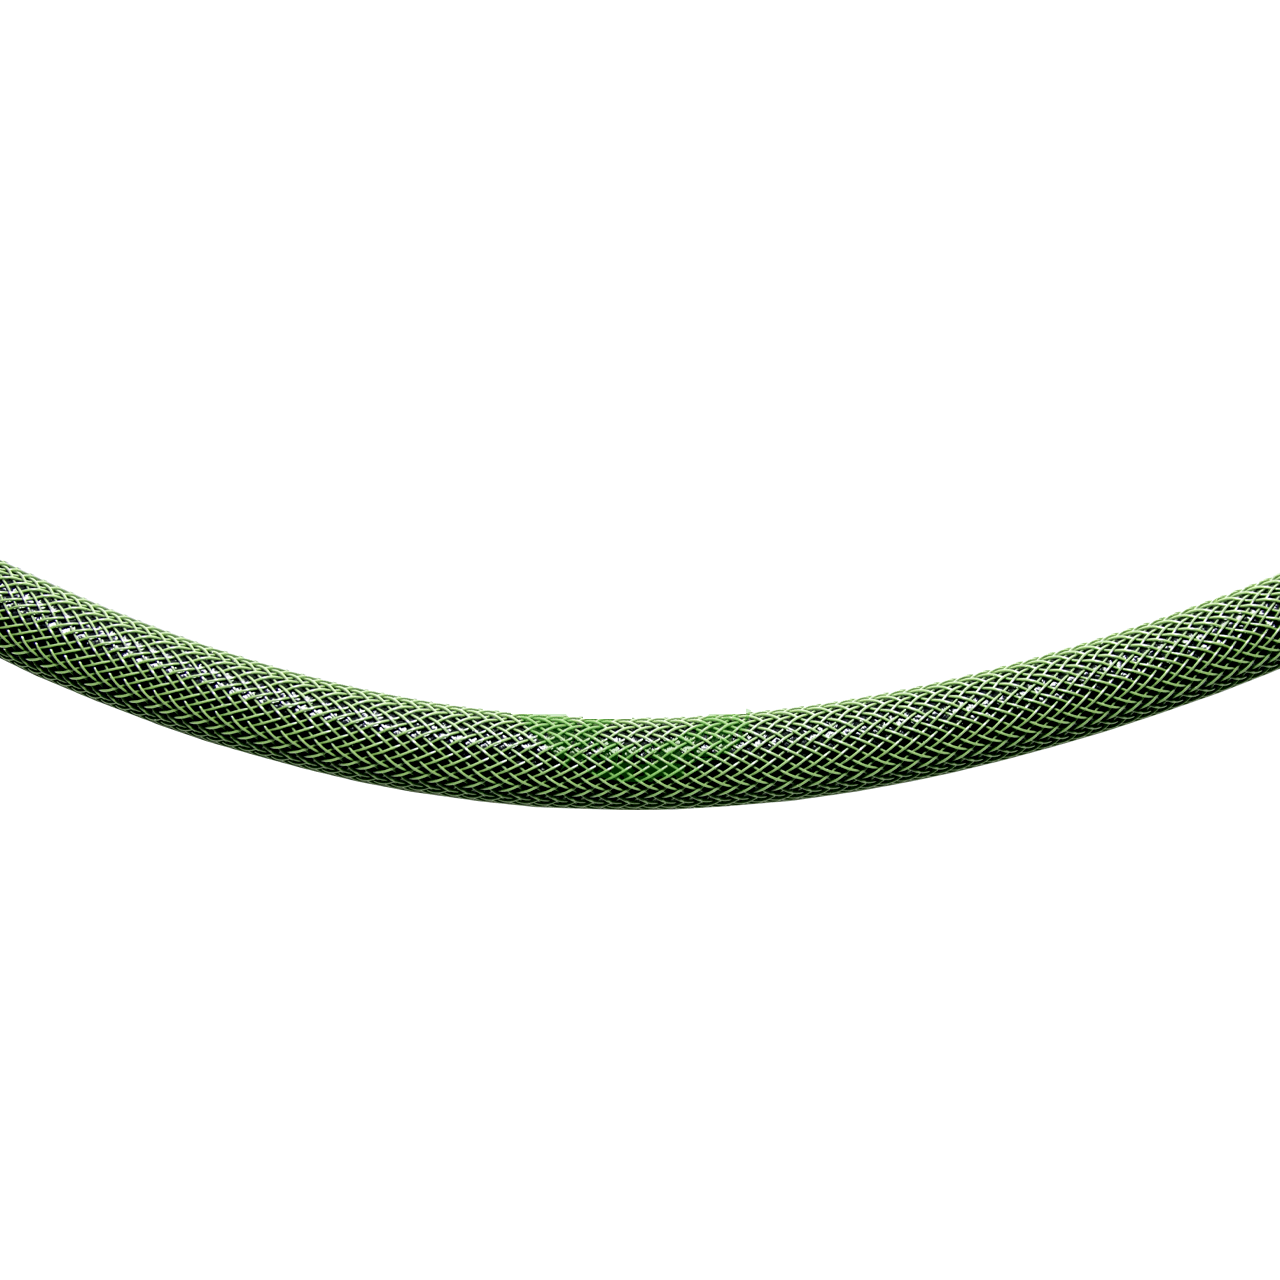 SS Airsoft Olive Drab Grip Line Standard Weave -AGL-HPA Grip Line - ssairsoft.com